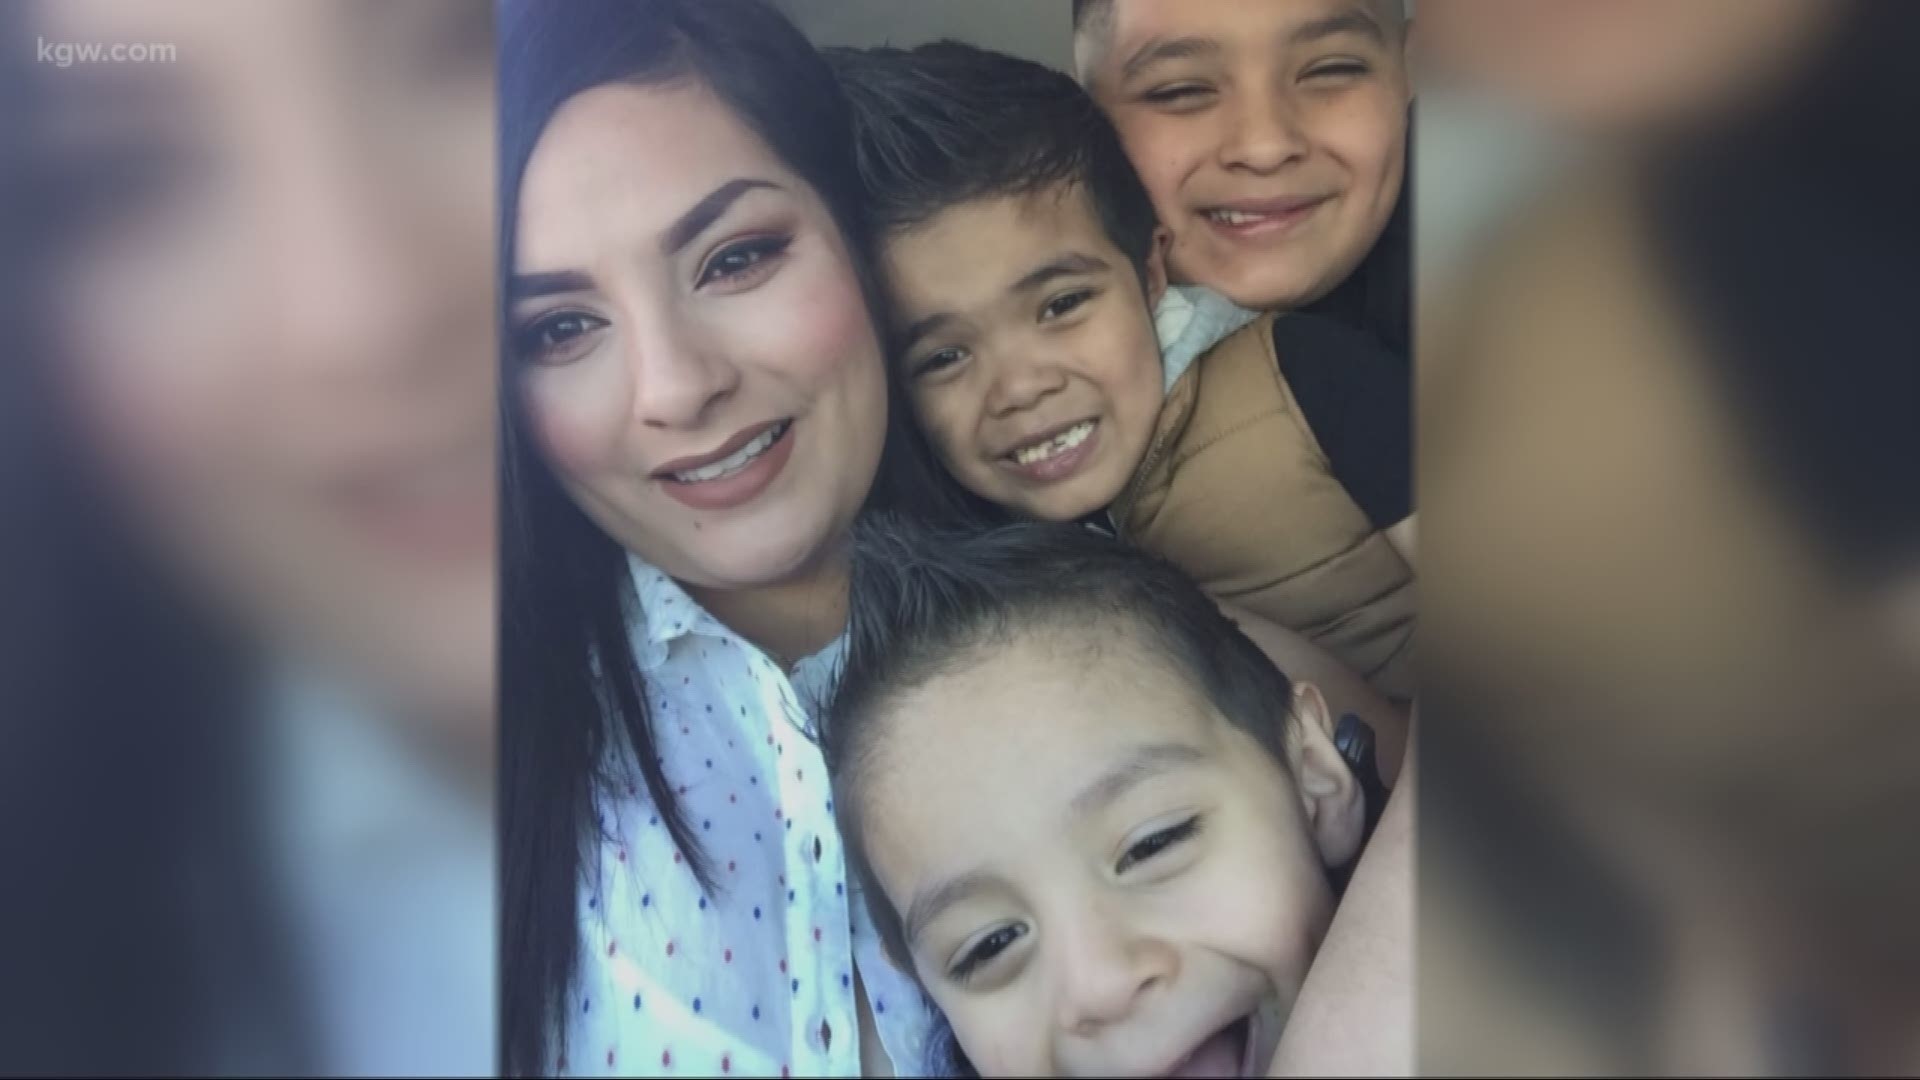 An Oregon mother may be deported, despite having previous legal status, while her son is fighting a kidney disease.